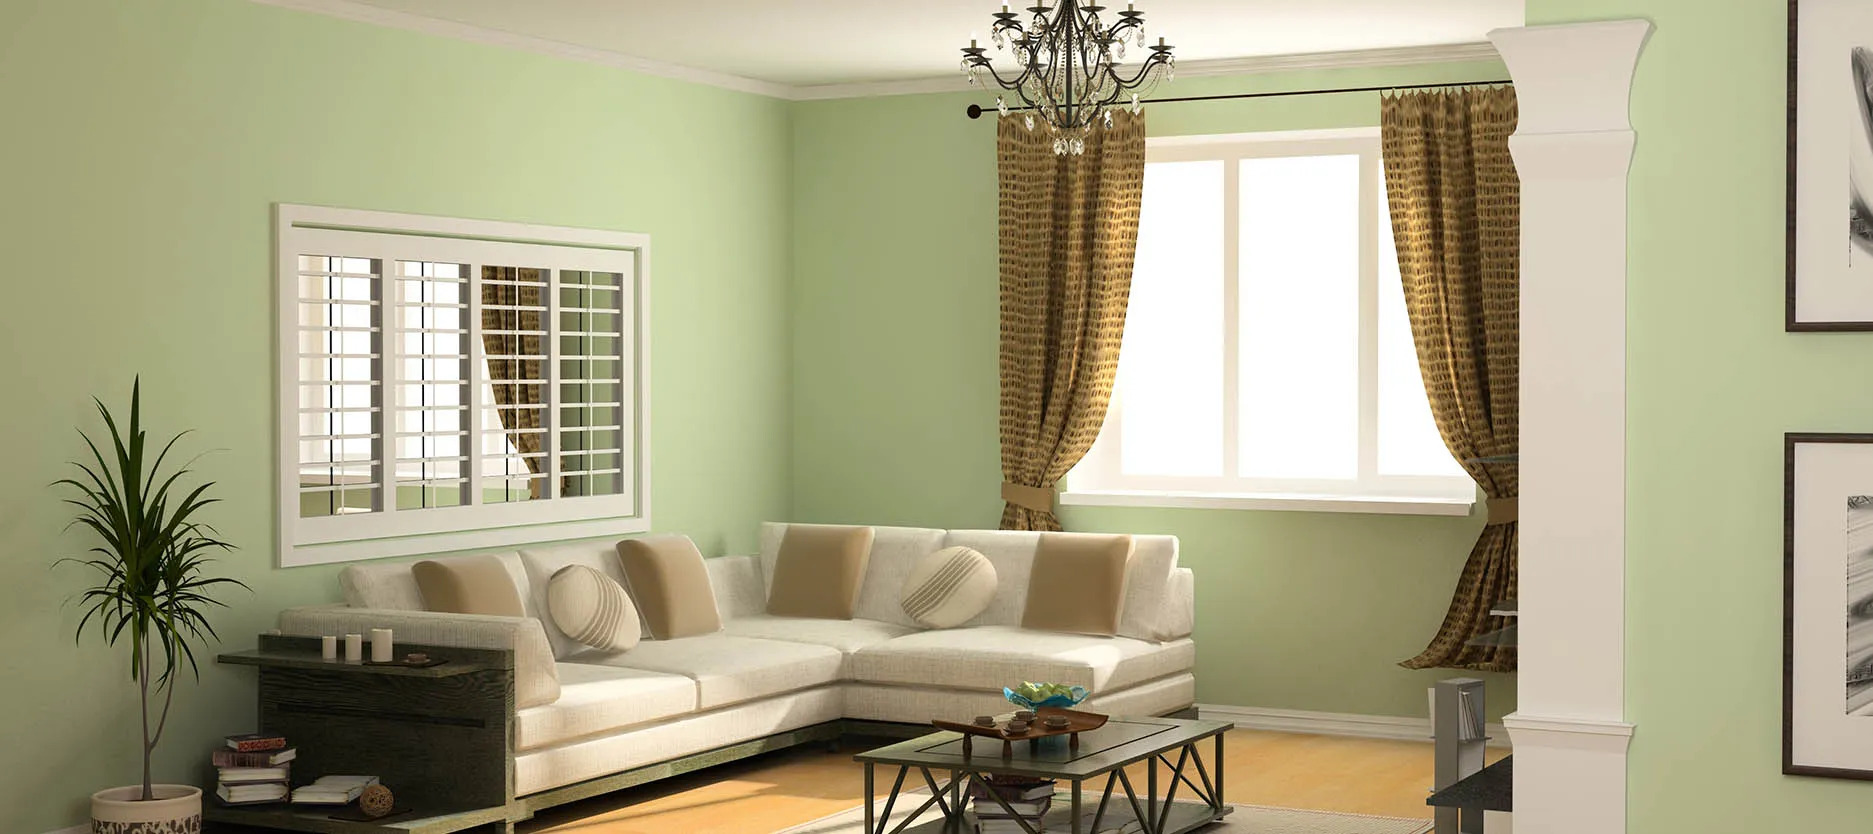 Colour combination for walls: Mint Green and Ivory